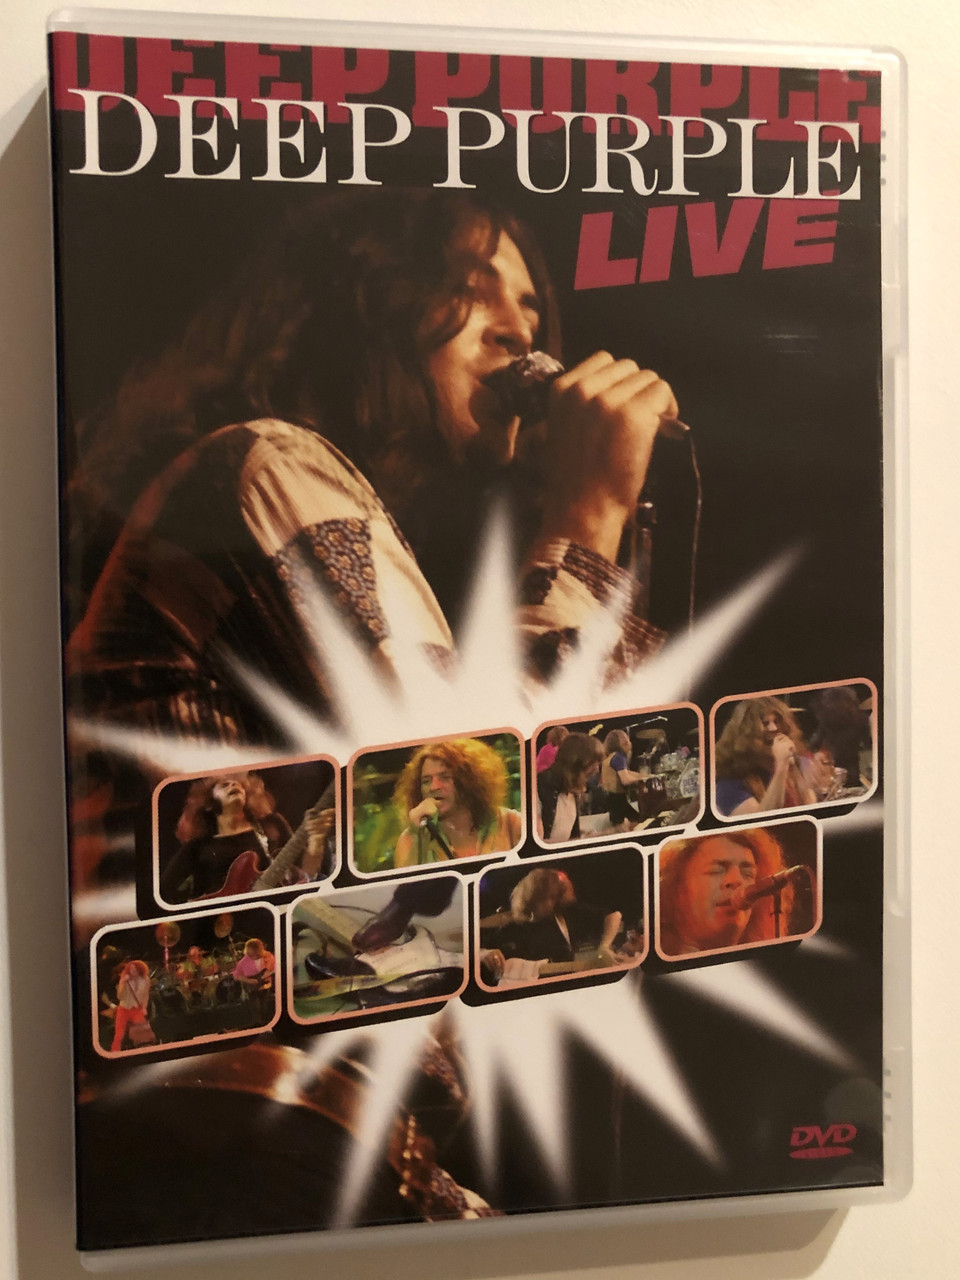 Deep Purple Live / A blistering gathering of sheer rock power / Ritchie  Blackmore on guitar, Jon Lord on keyboards, Roger Glover on bass, and Ian  Paice on drums / DVD -